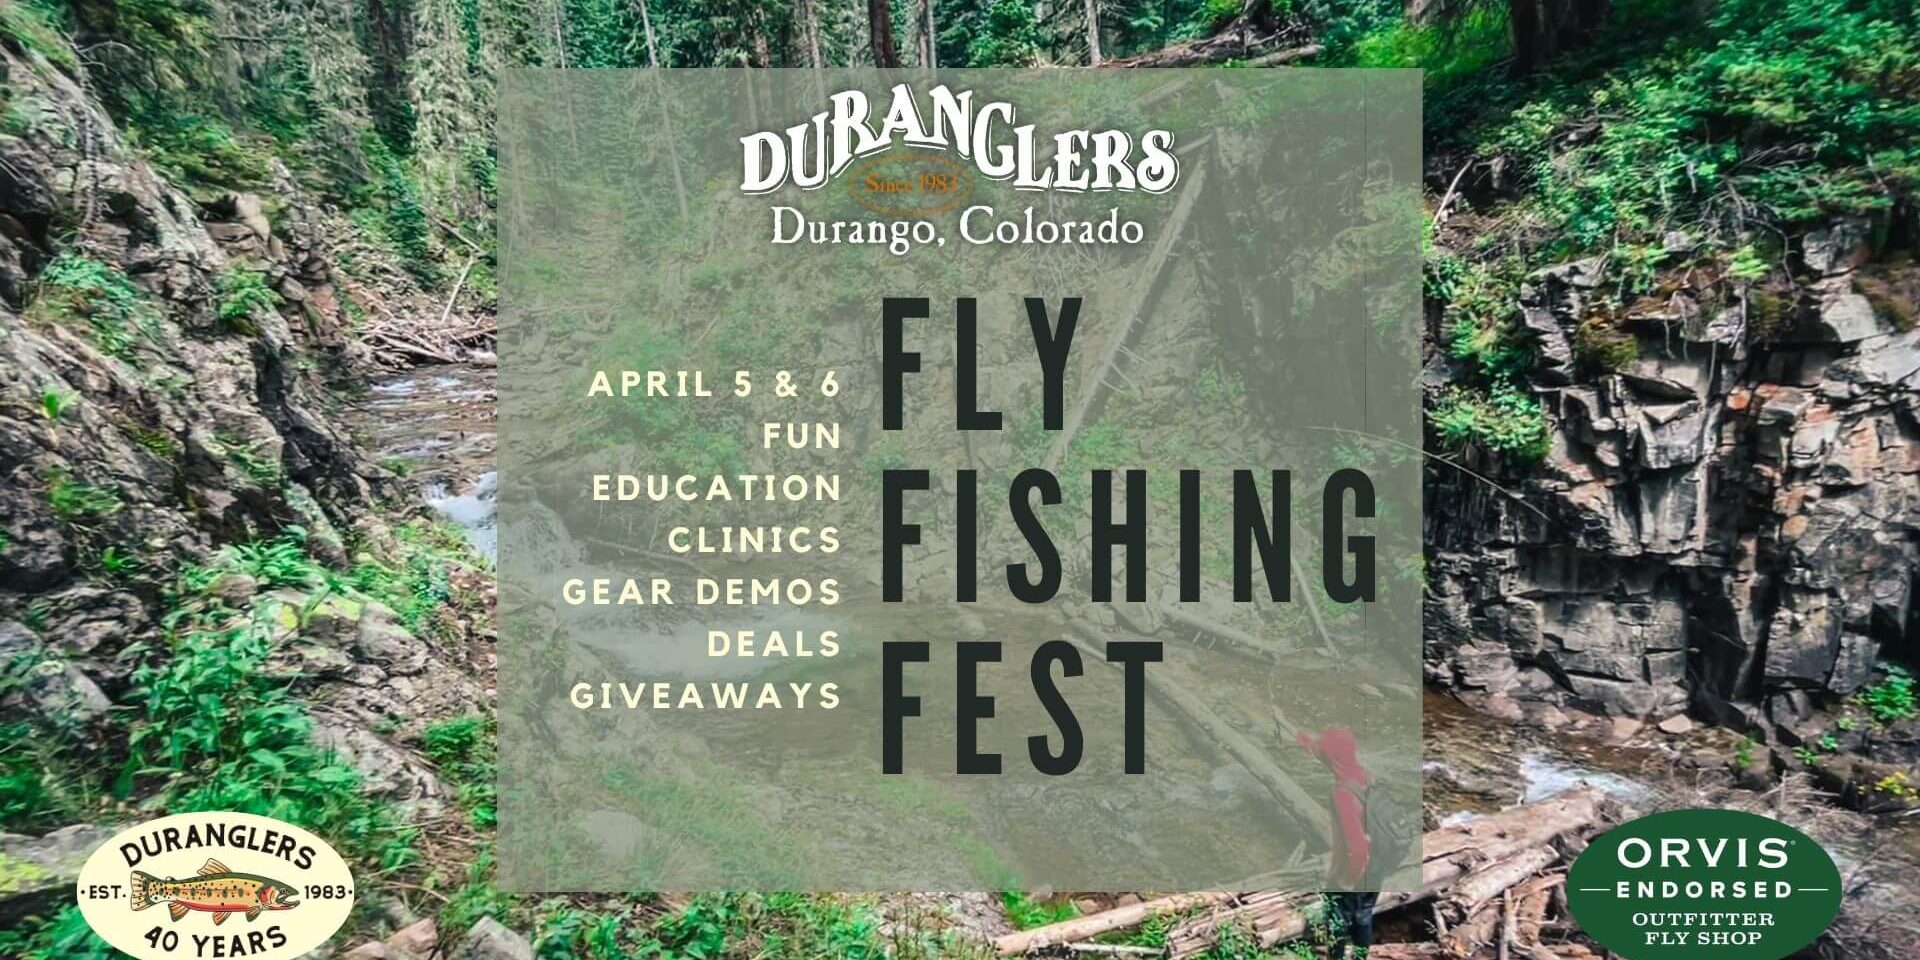 Duranglers 2016 Fly Fishing Festival in Review  Trout fishing tips, Fly  fishing, Trout fishing